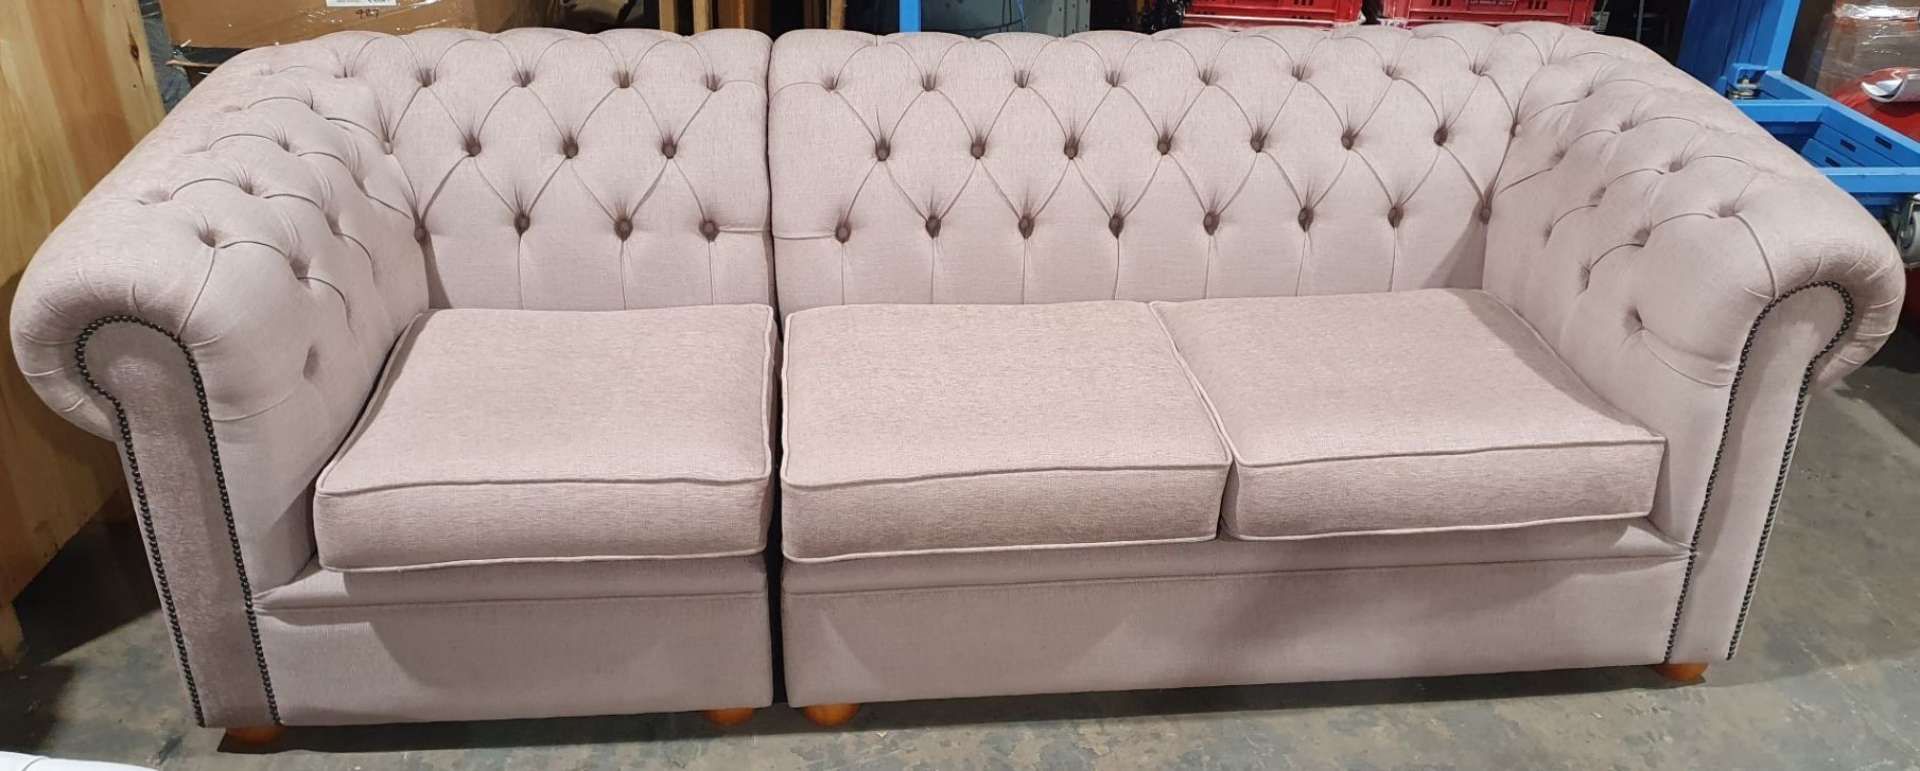 BESPOKE CHESTERFIELD 2 UNIT SOFA - Image 2 of 8